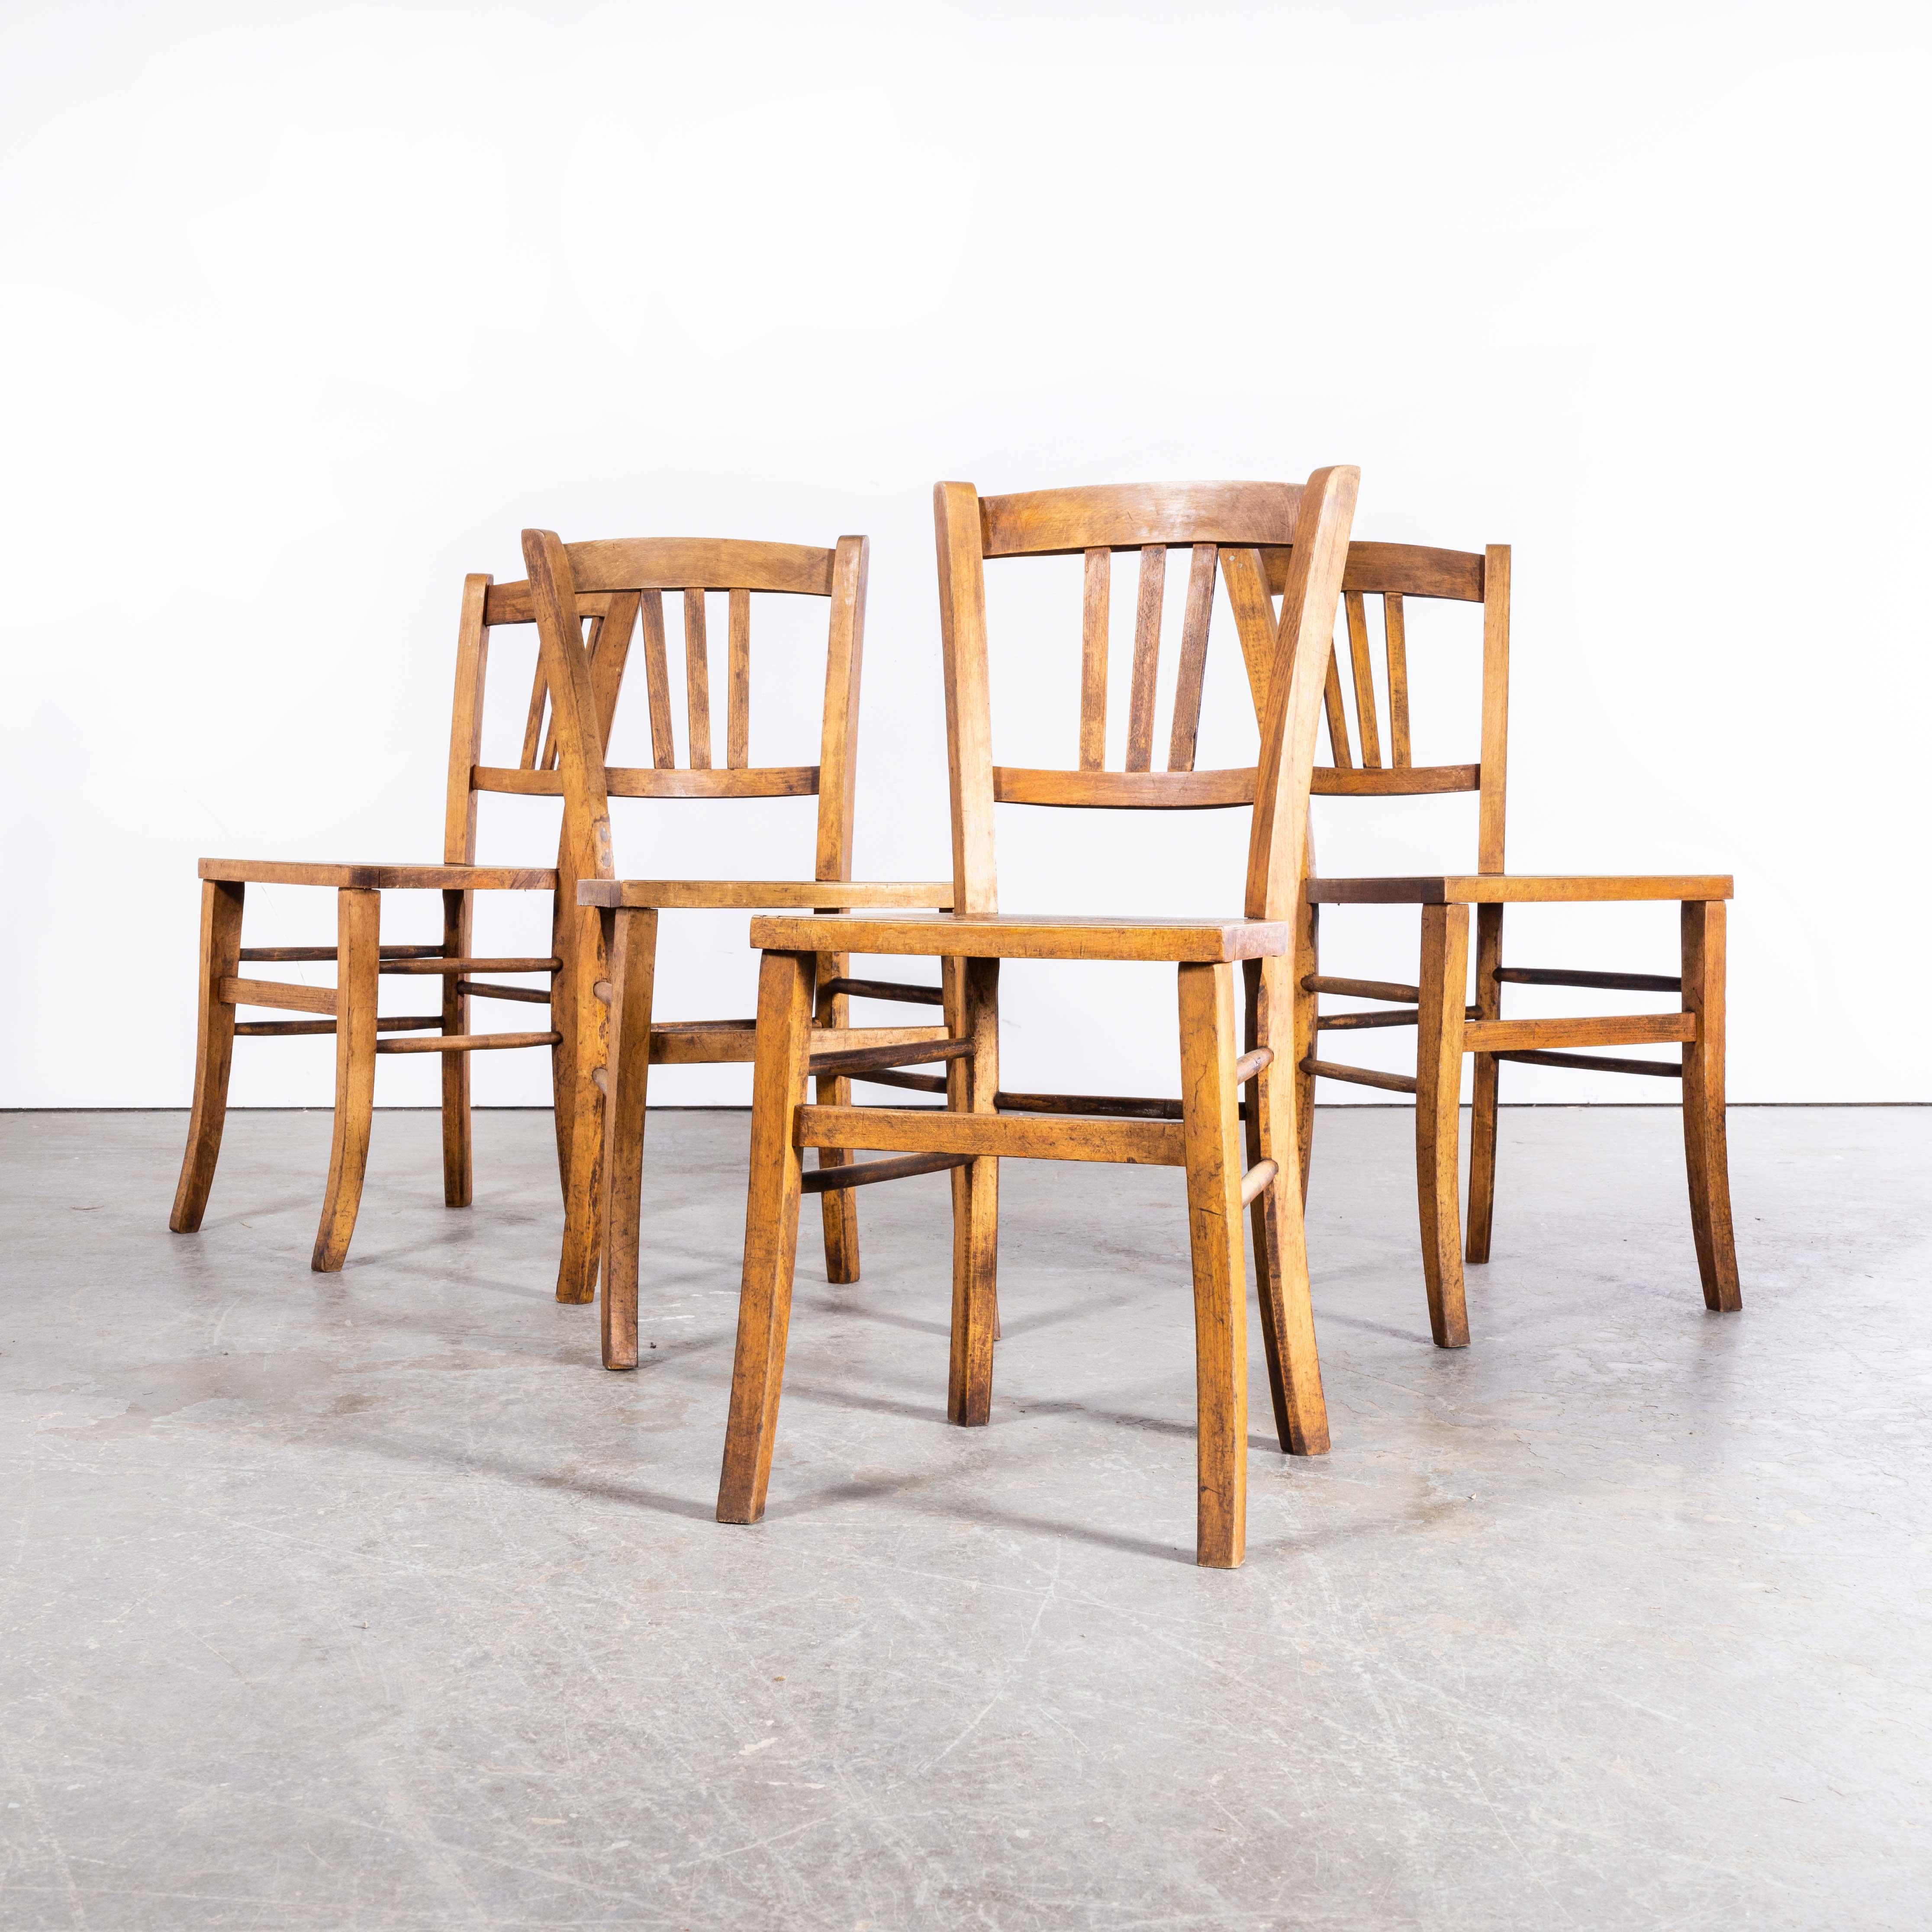 1930’s Luterma Embossed seat bentwood dining chair - set of four. The process of steam bending beech to create elegant chairs was discovered and developed by Thonet, but when its patents expired in 1869 many companies including Luterma launched